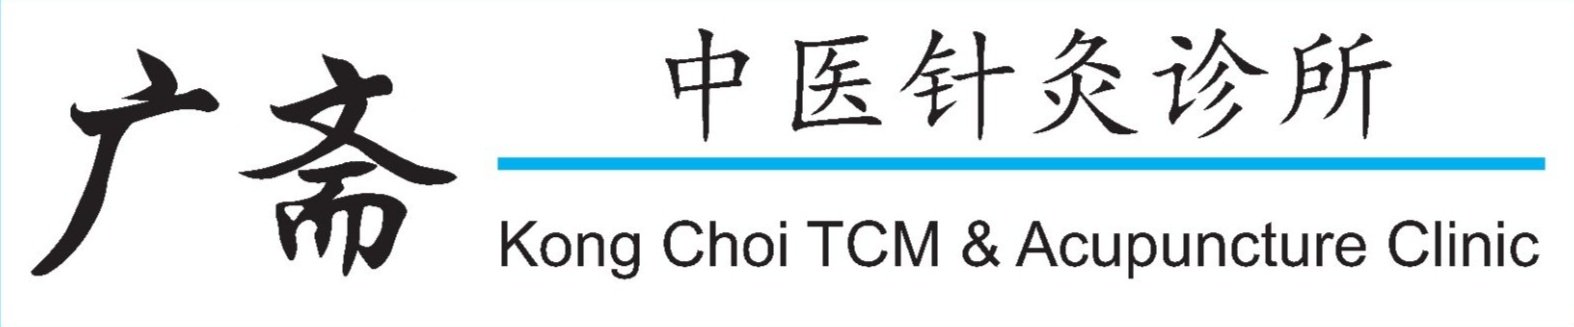 Kong Choi TCM &amp; Acupuncture Clinic